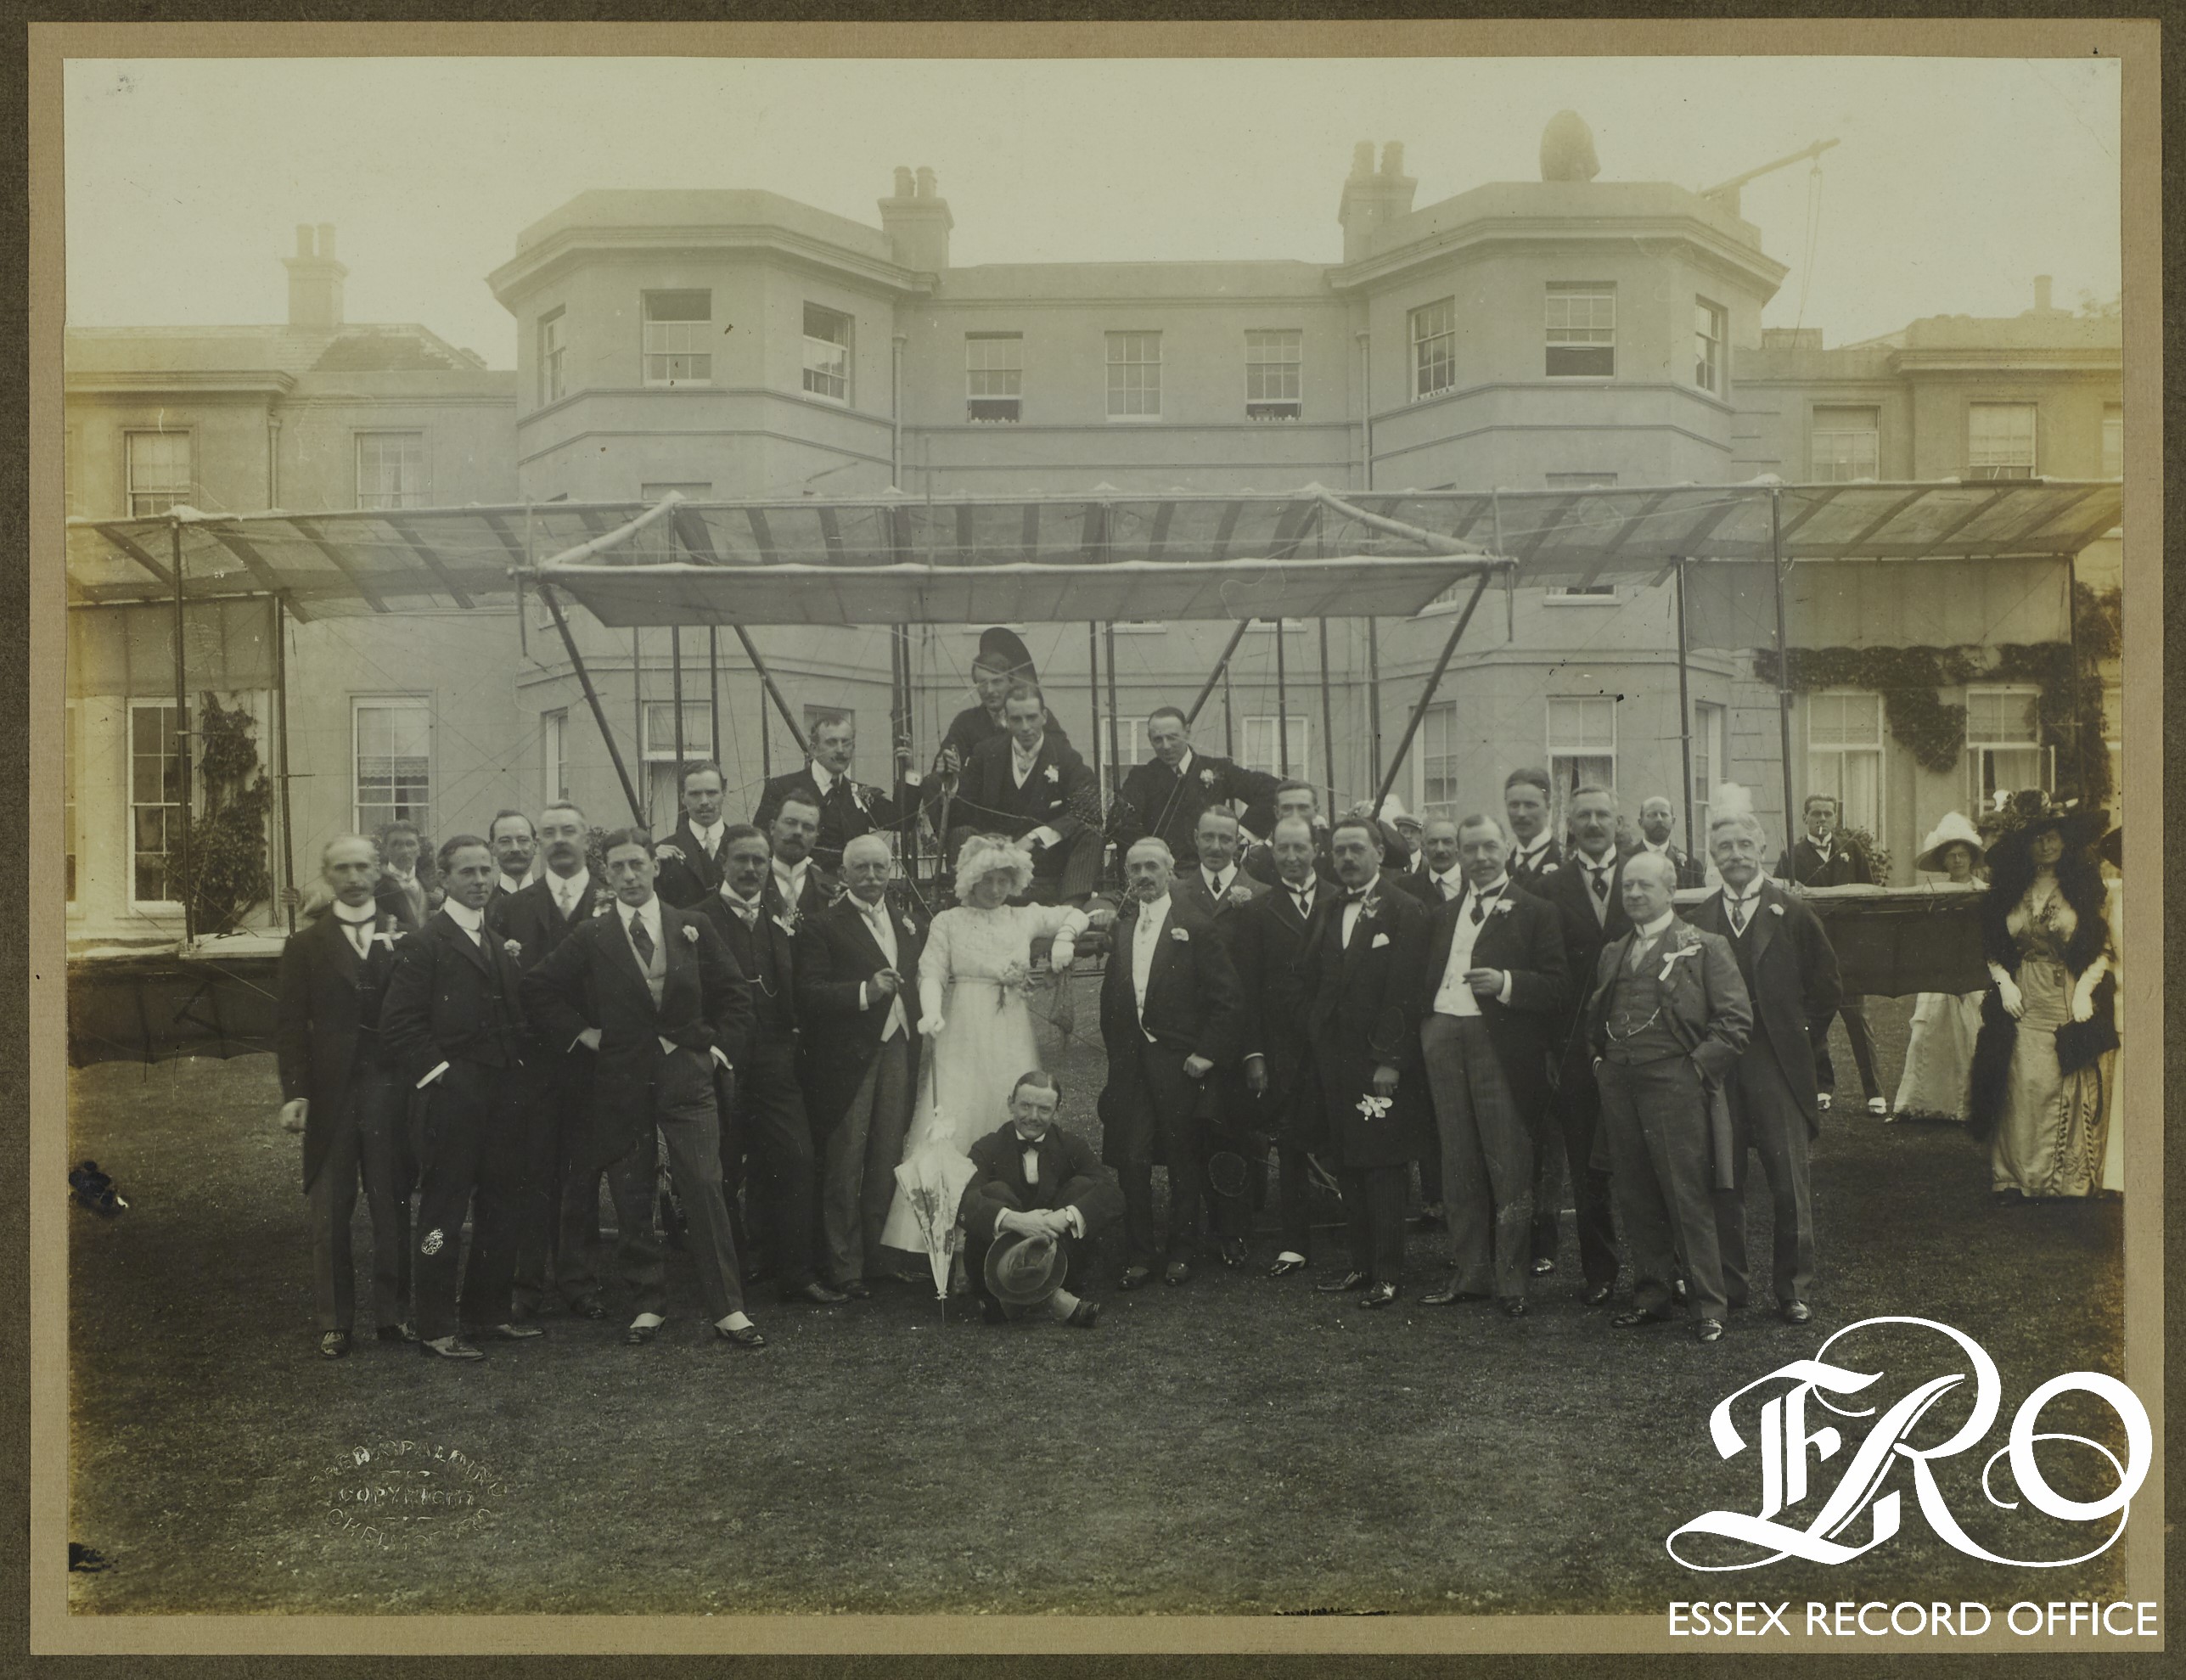 Black and white photograph of wedding party (mainly men with some women nearly out of shot) posing with a biplane in front of Hylands House. Groom and several men on the biplane wing. Bride standing in front of the biplane in white wedding dress